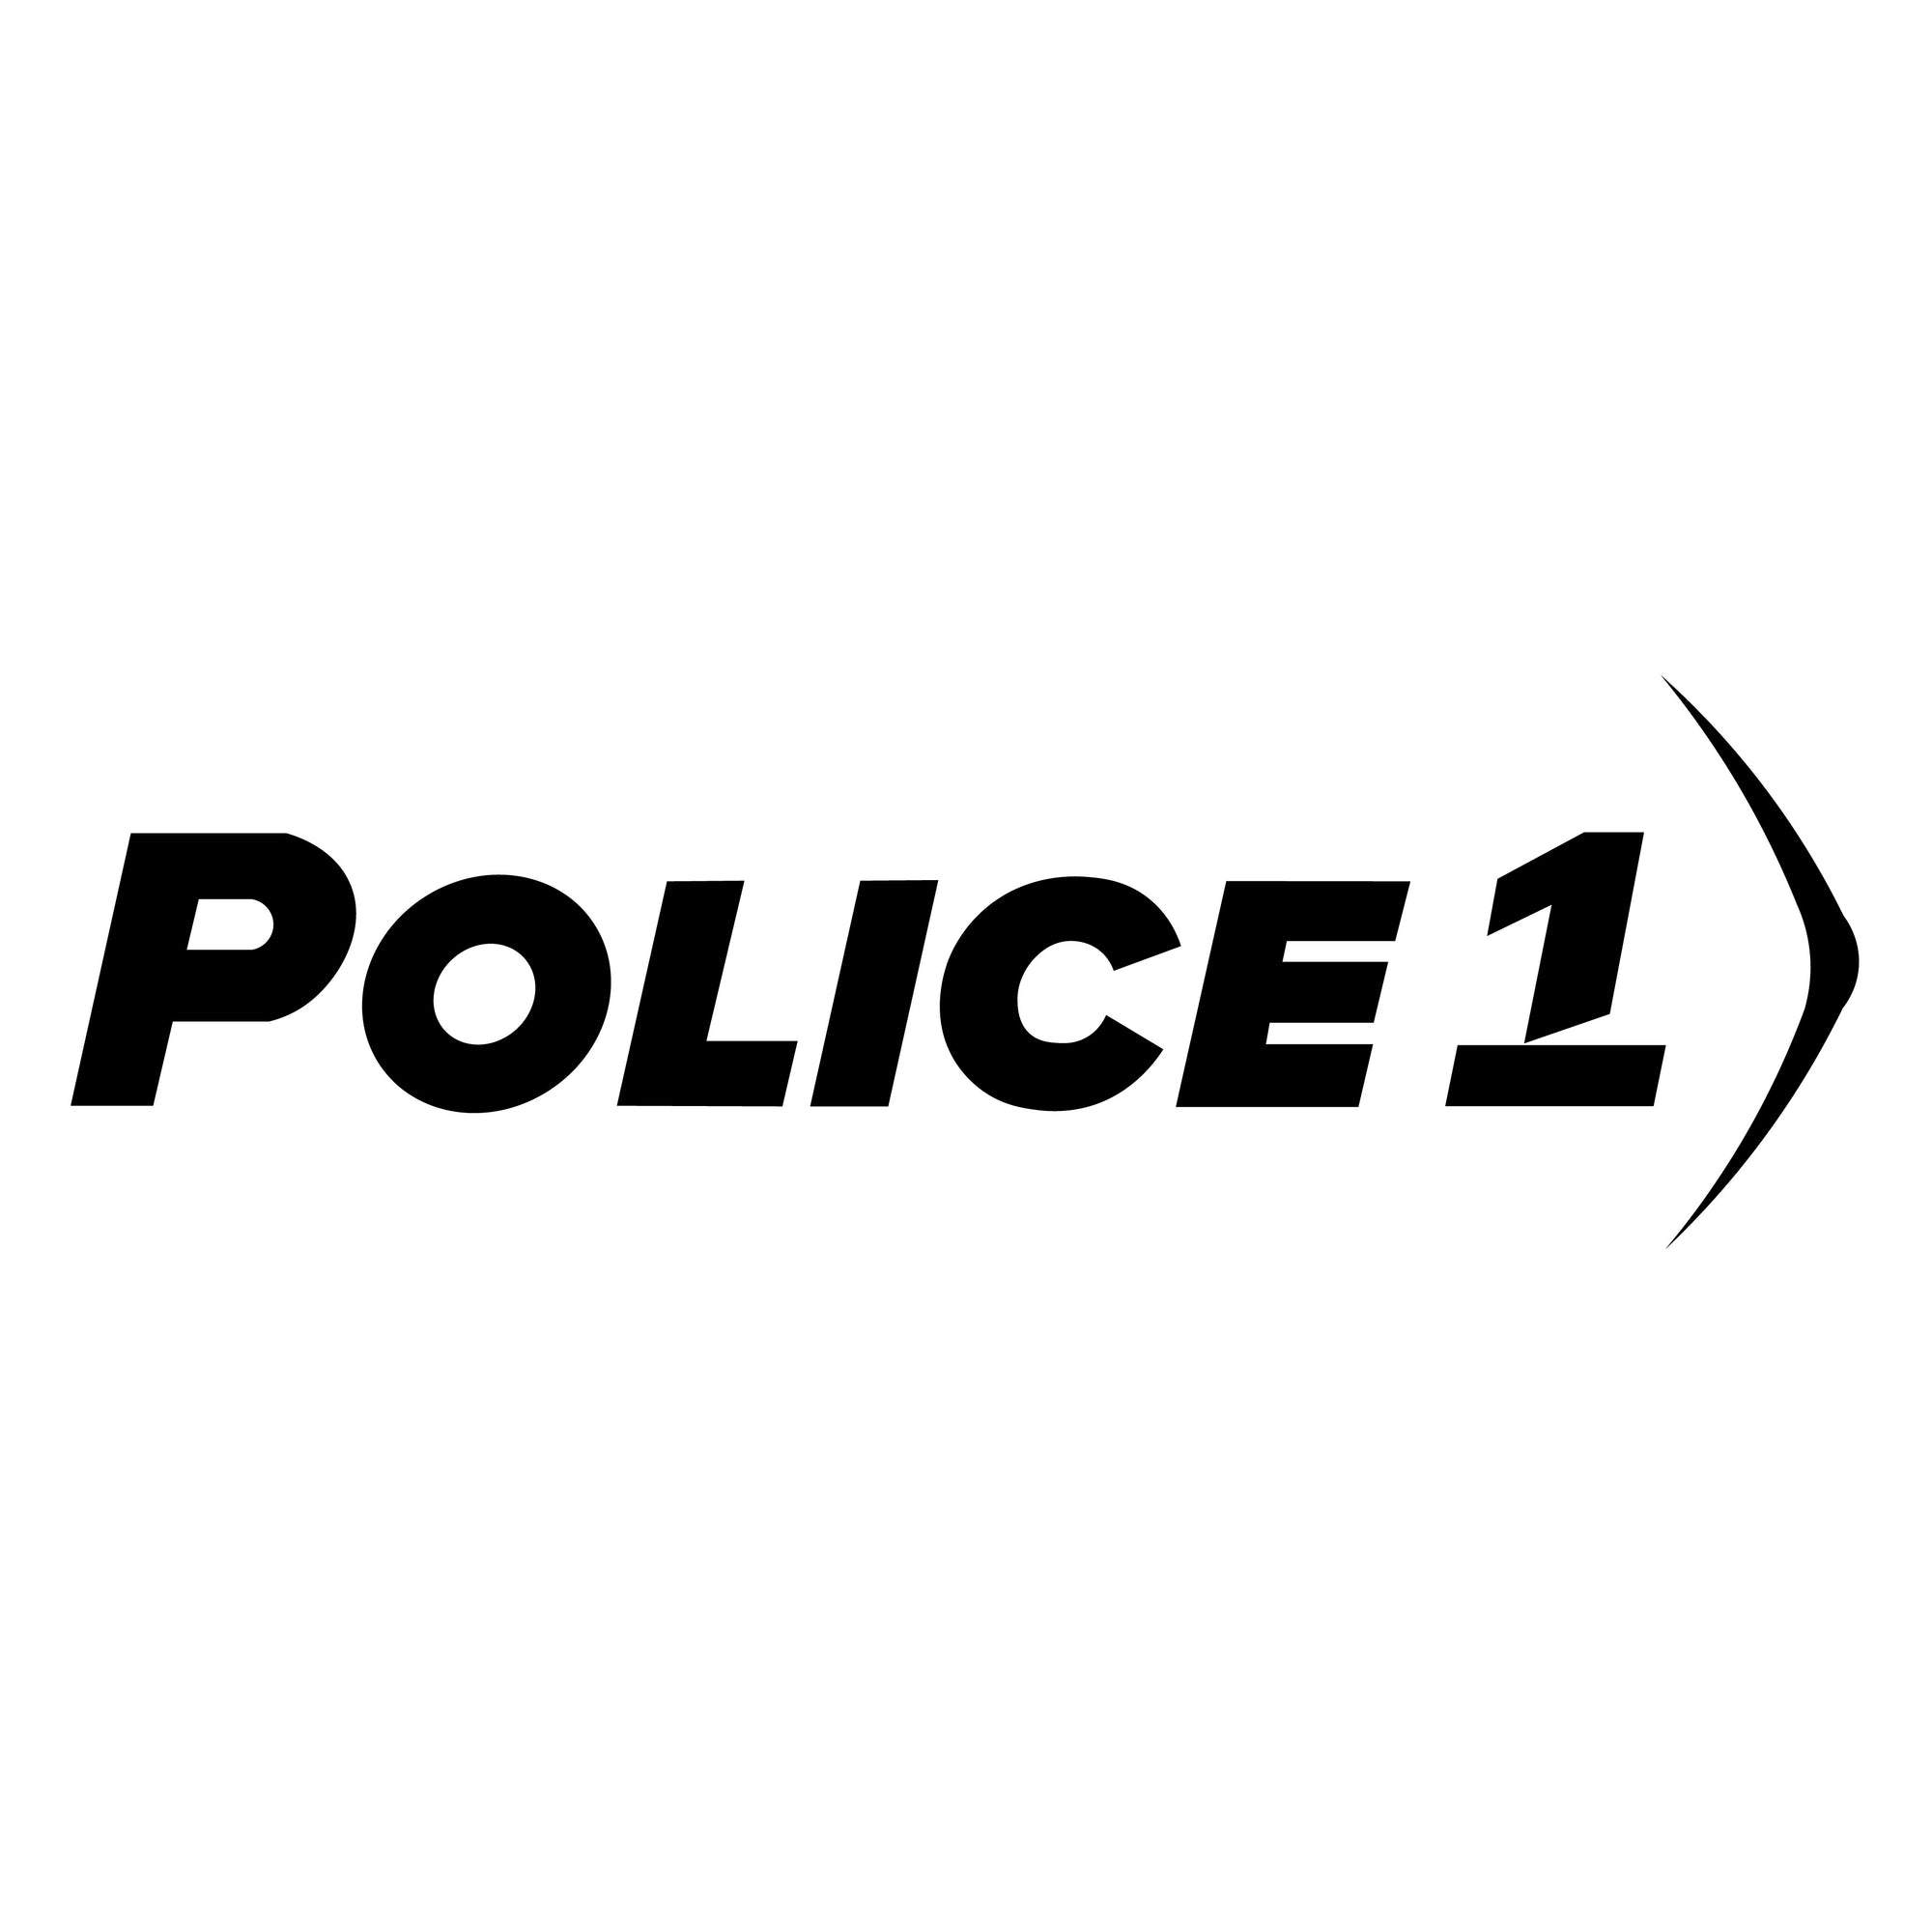 Police 1 writes about our innovative armor solutions for backpack armor, body armor, or even the lightest ballistic plates on the market. Find out more information about our newest body armour products here!